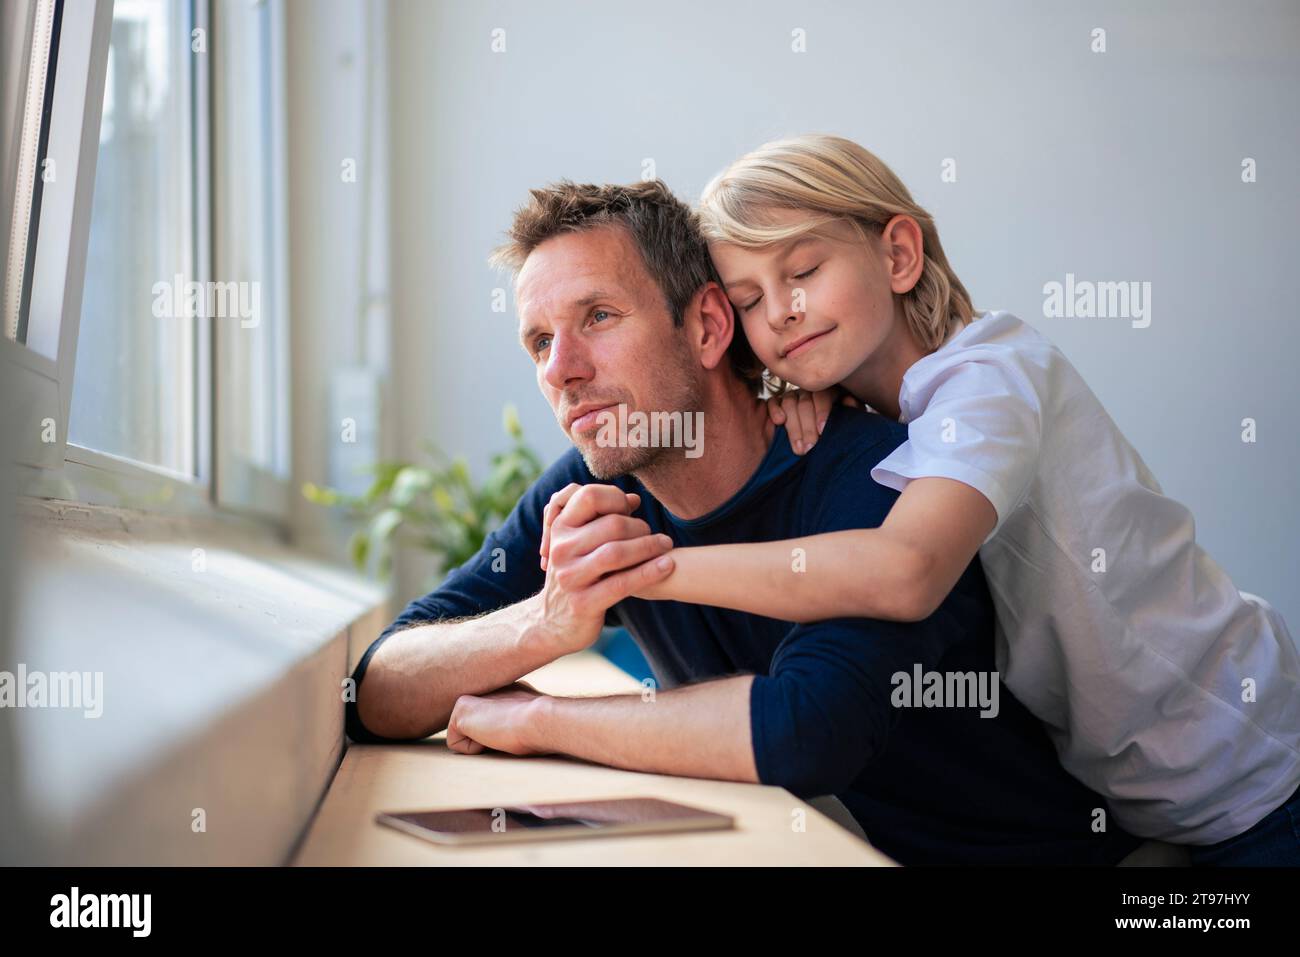 Contemplative father looking through window and holding hands with son at home Stock Photo